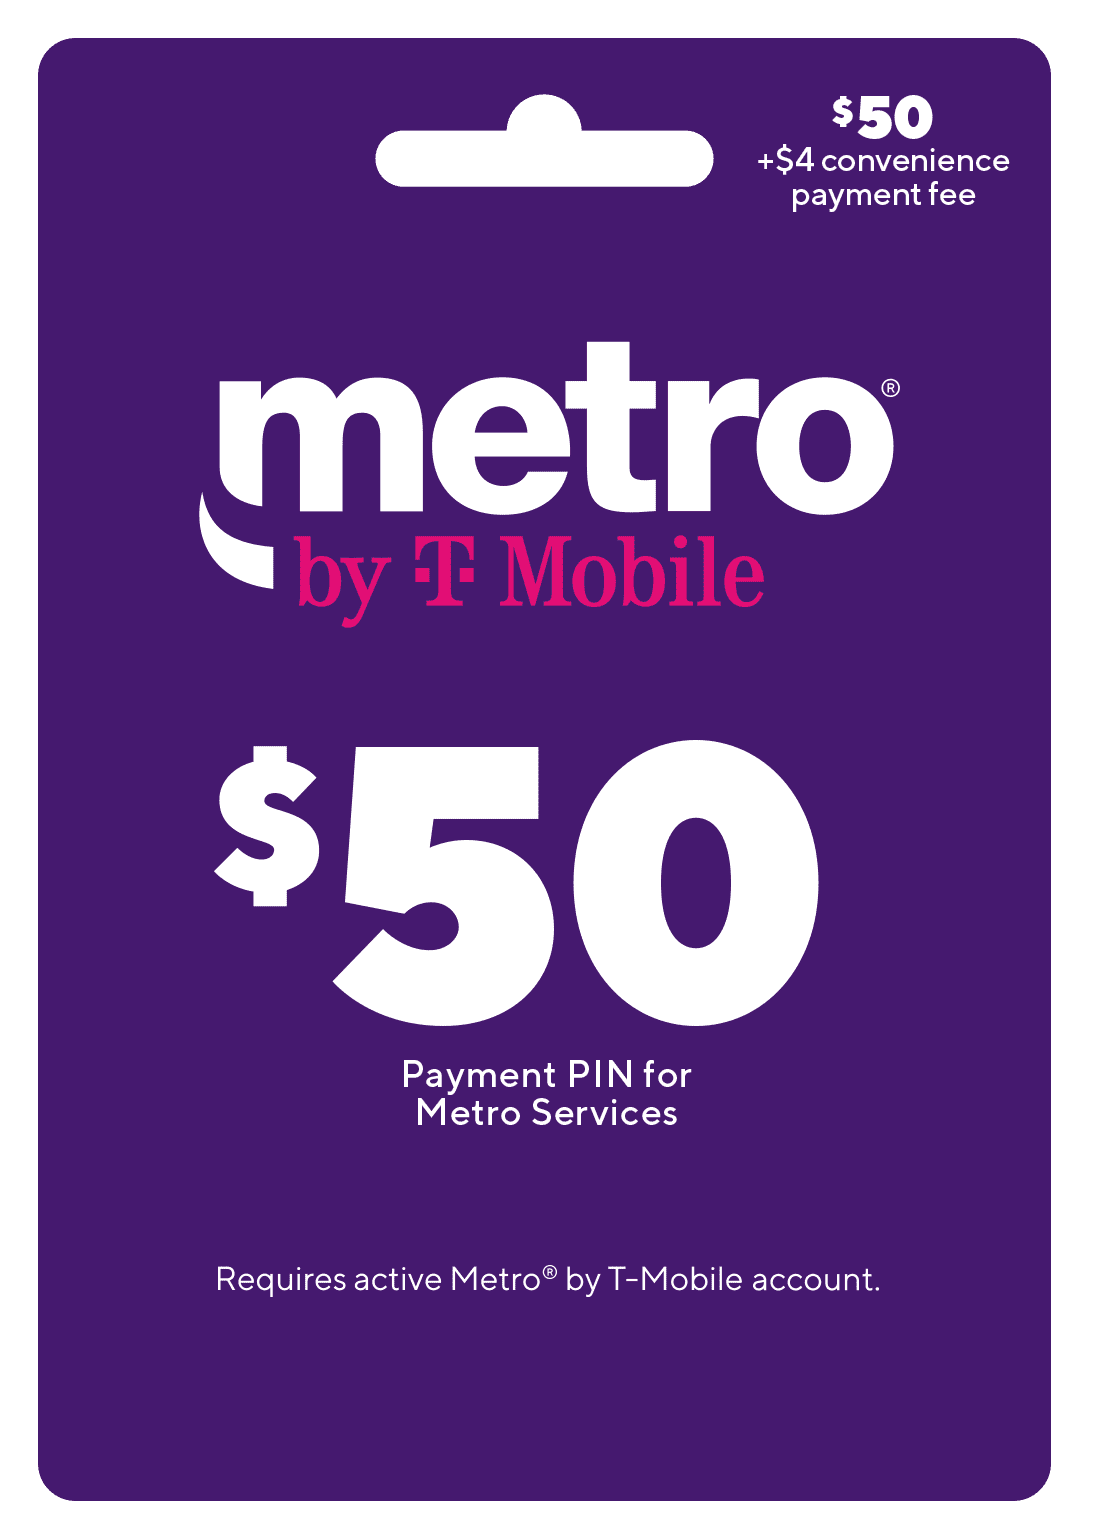 metro-by-t-mobile-50-payment-pin-w-4-convenience-fee-email-delivery